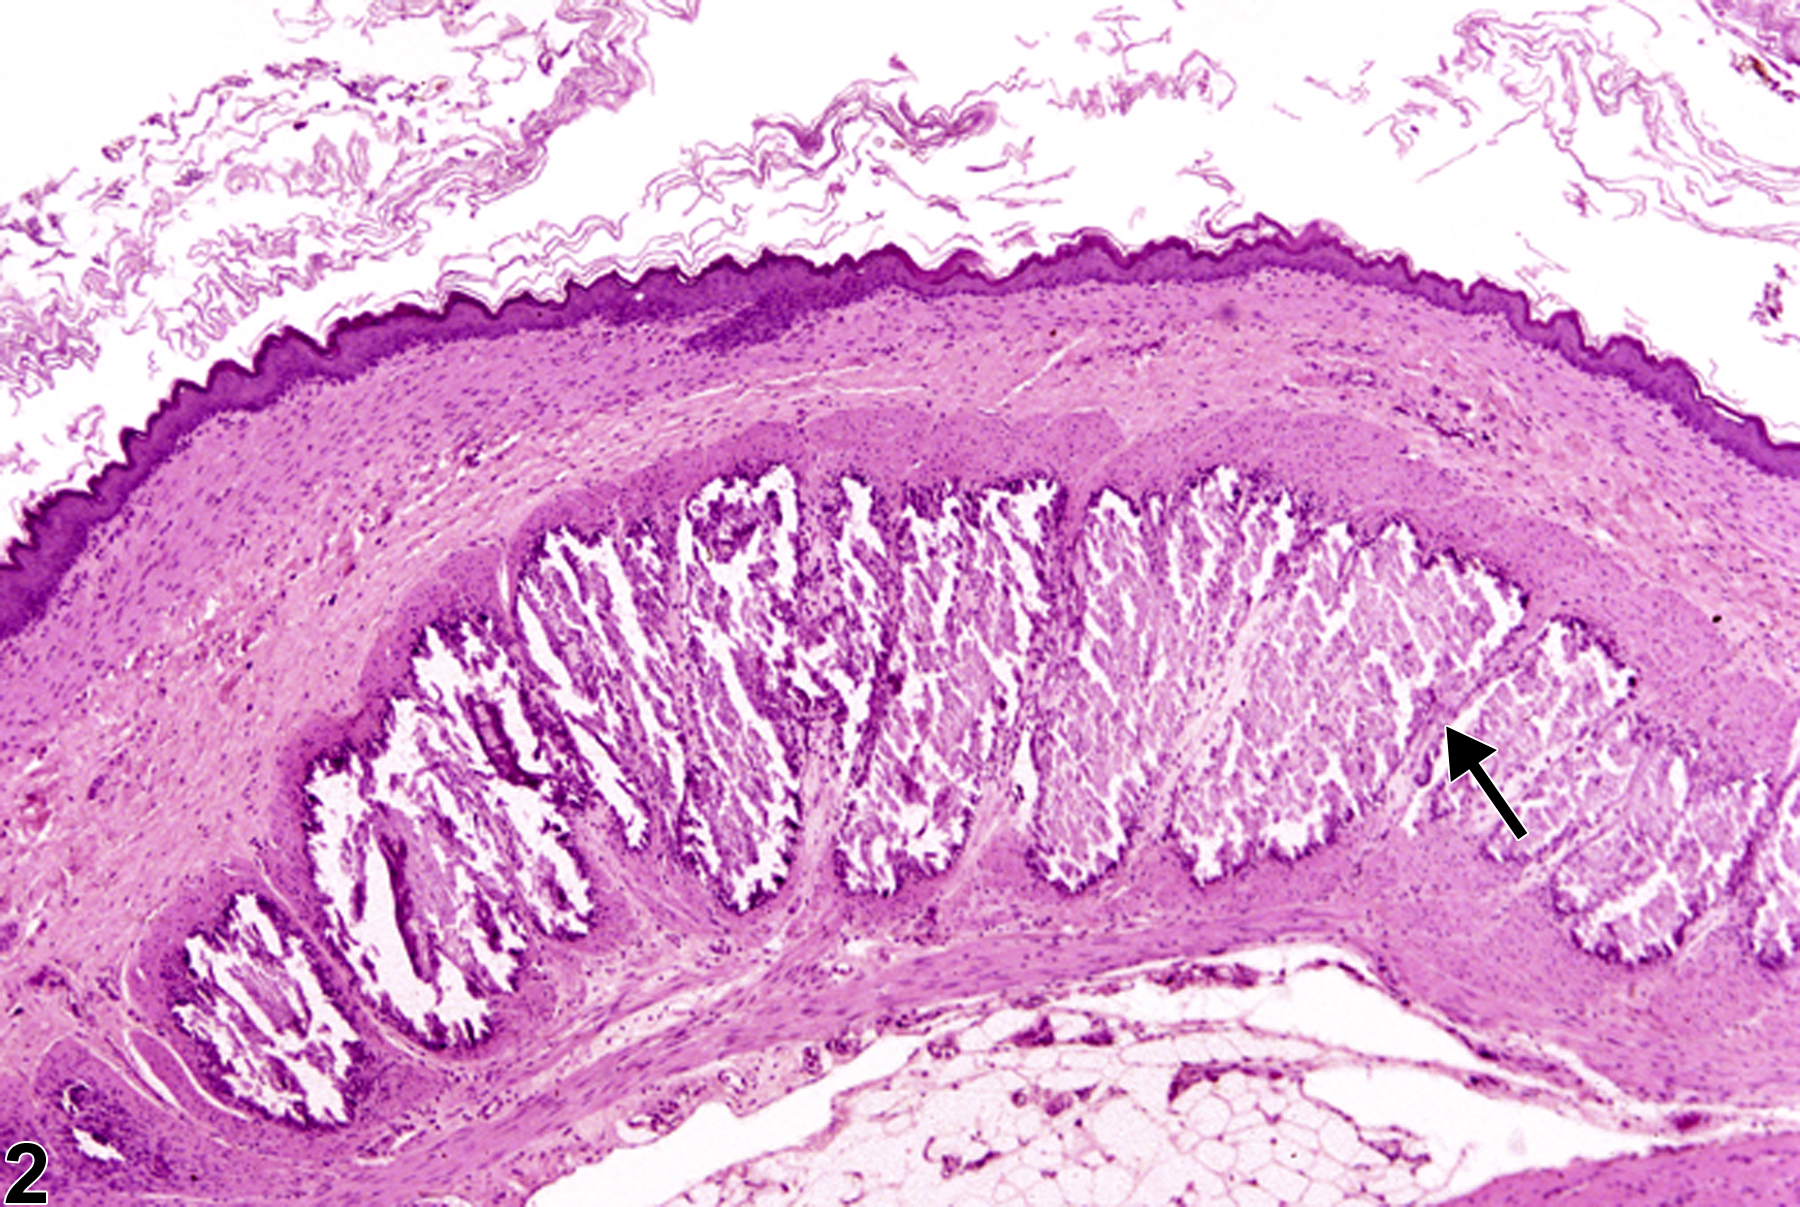 Image of mineralization in the forestomach from a male F344/N rat in a chronic study